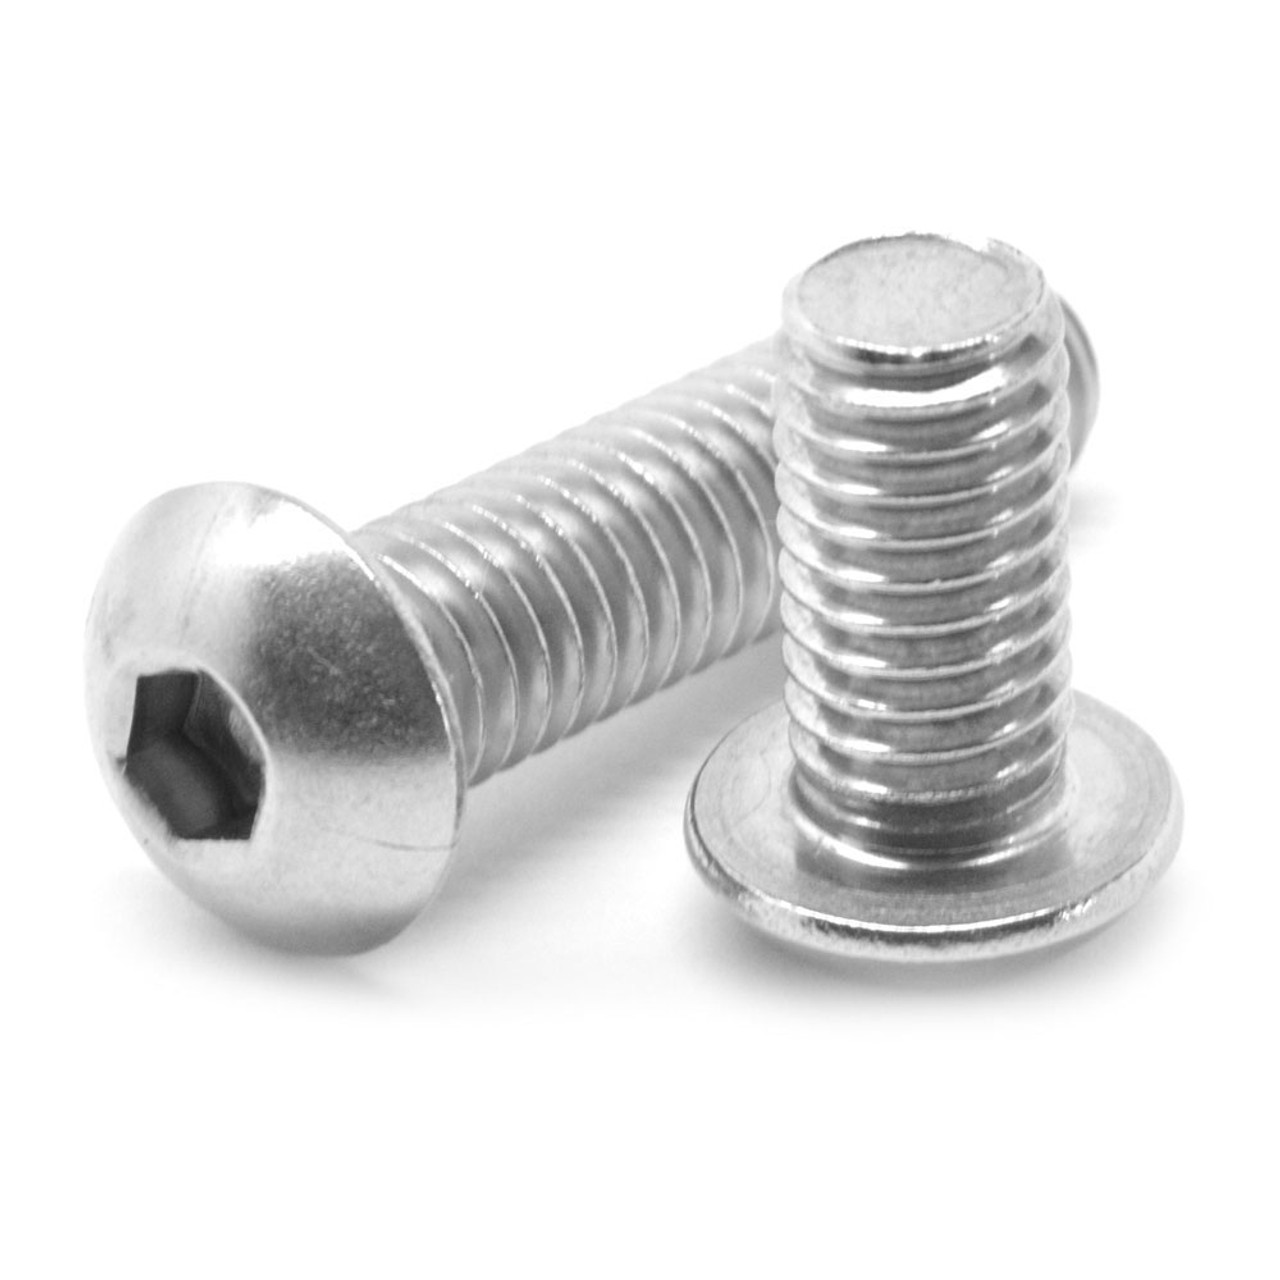 M12 x 1.75 x 80 MM (FT) Coarse Thread ISO 7380 Socket Button Head Cap Screw Stainless Steel 18-8